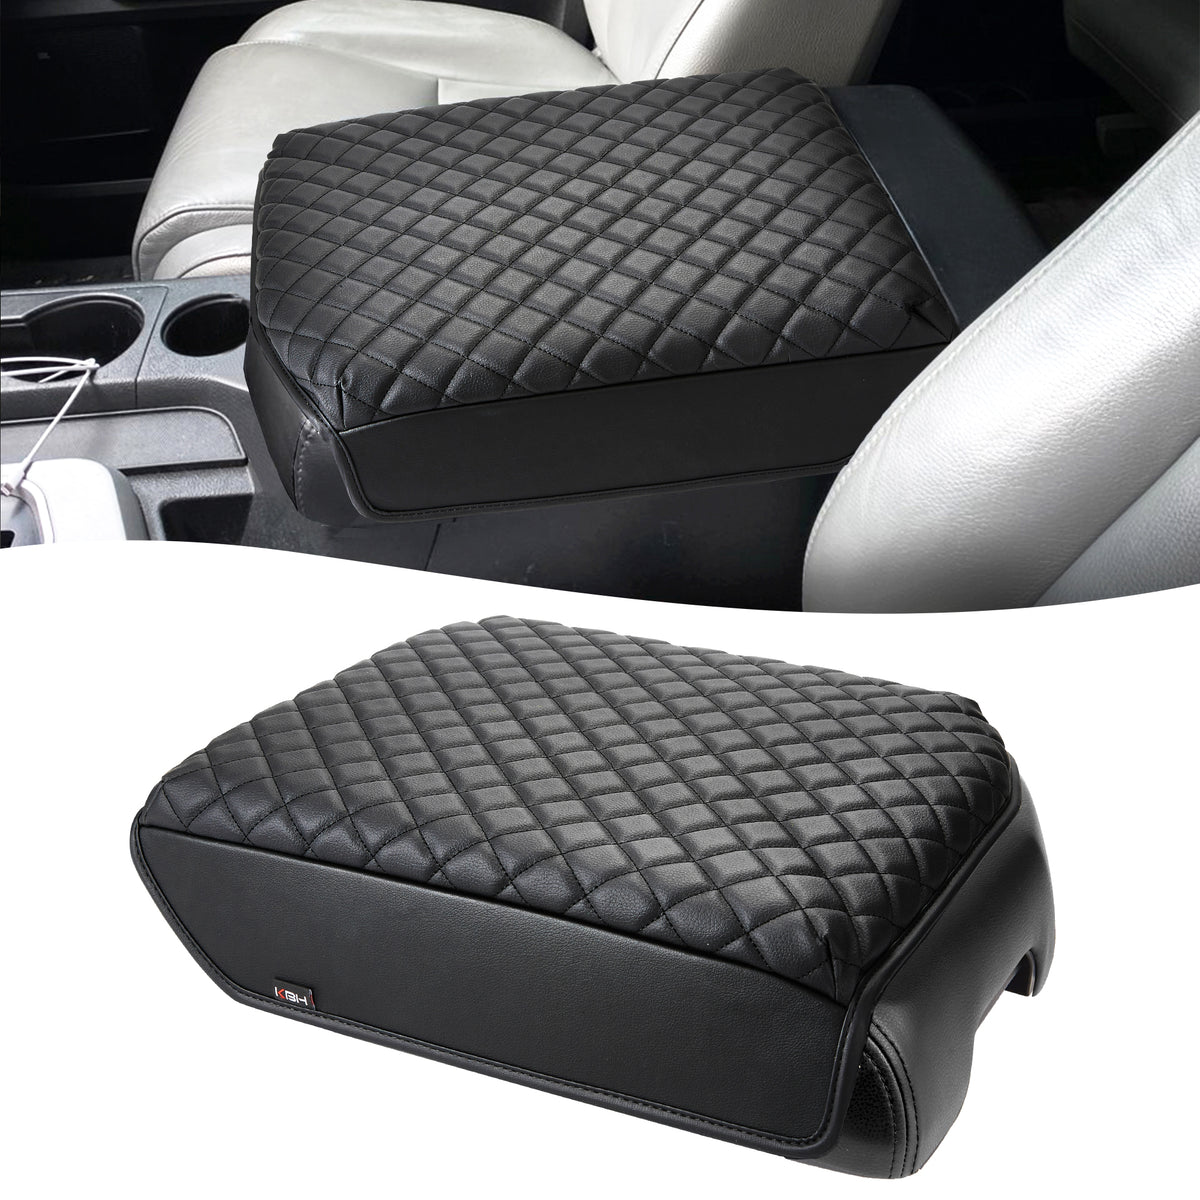 KBH Center Console Armrest Cover Cushion Pad Protector for